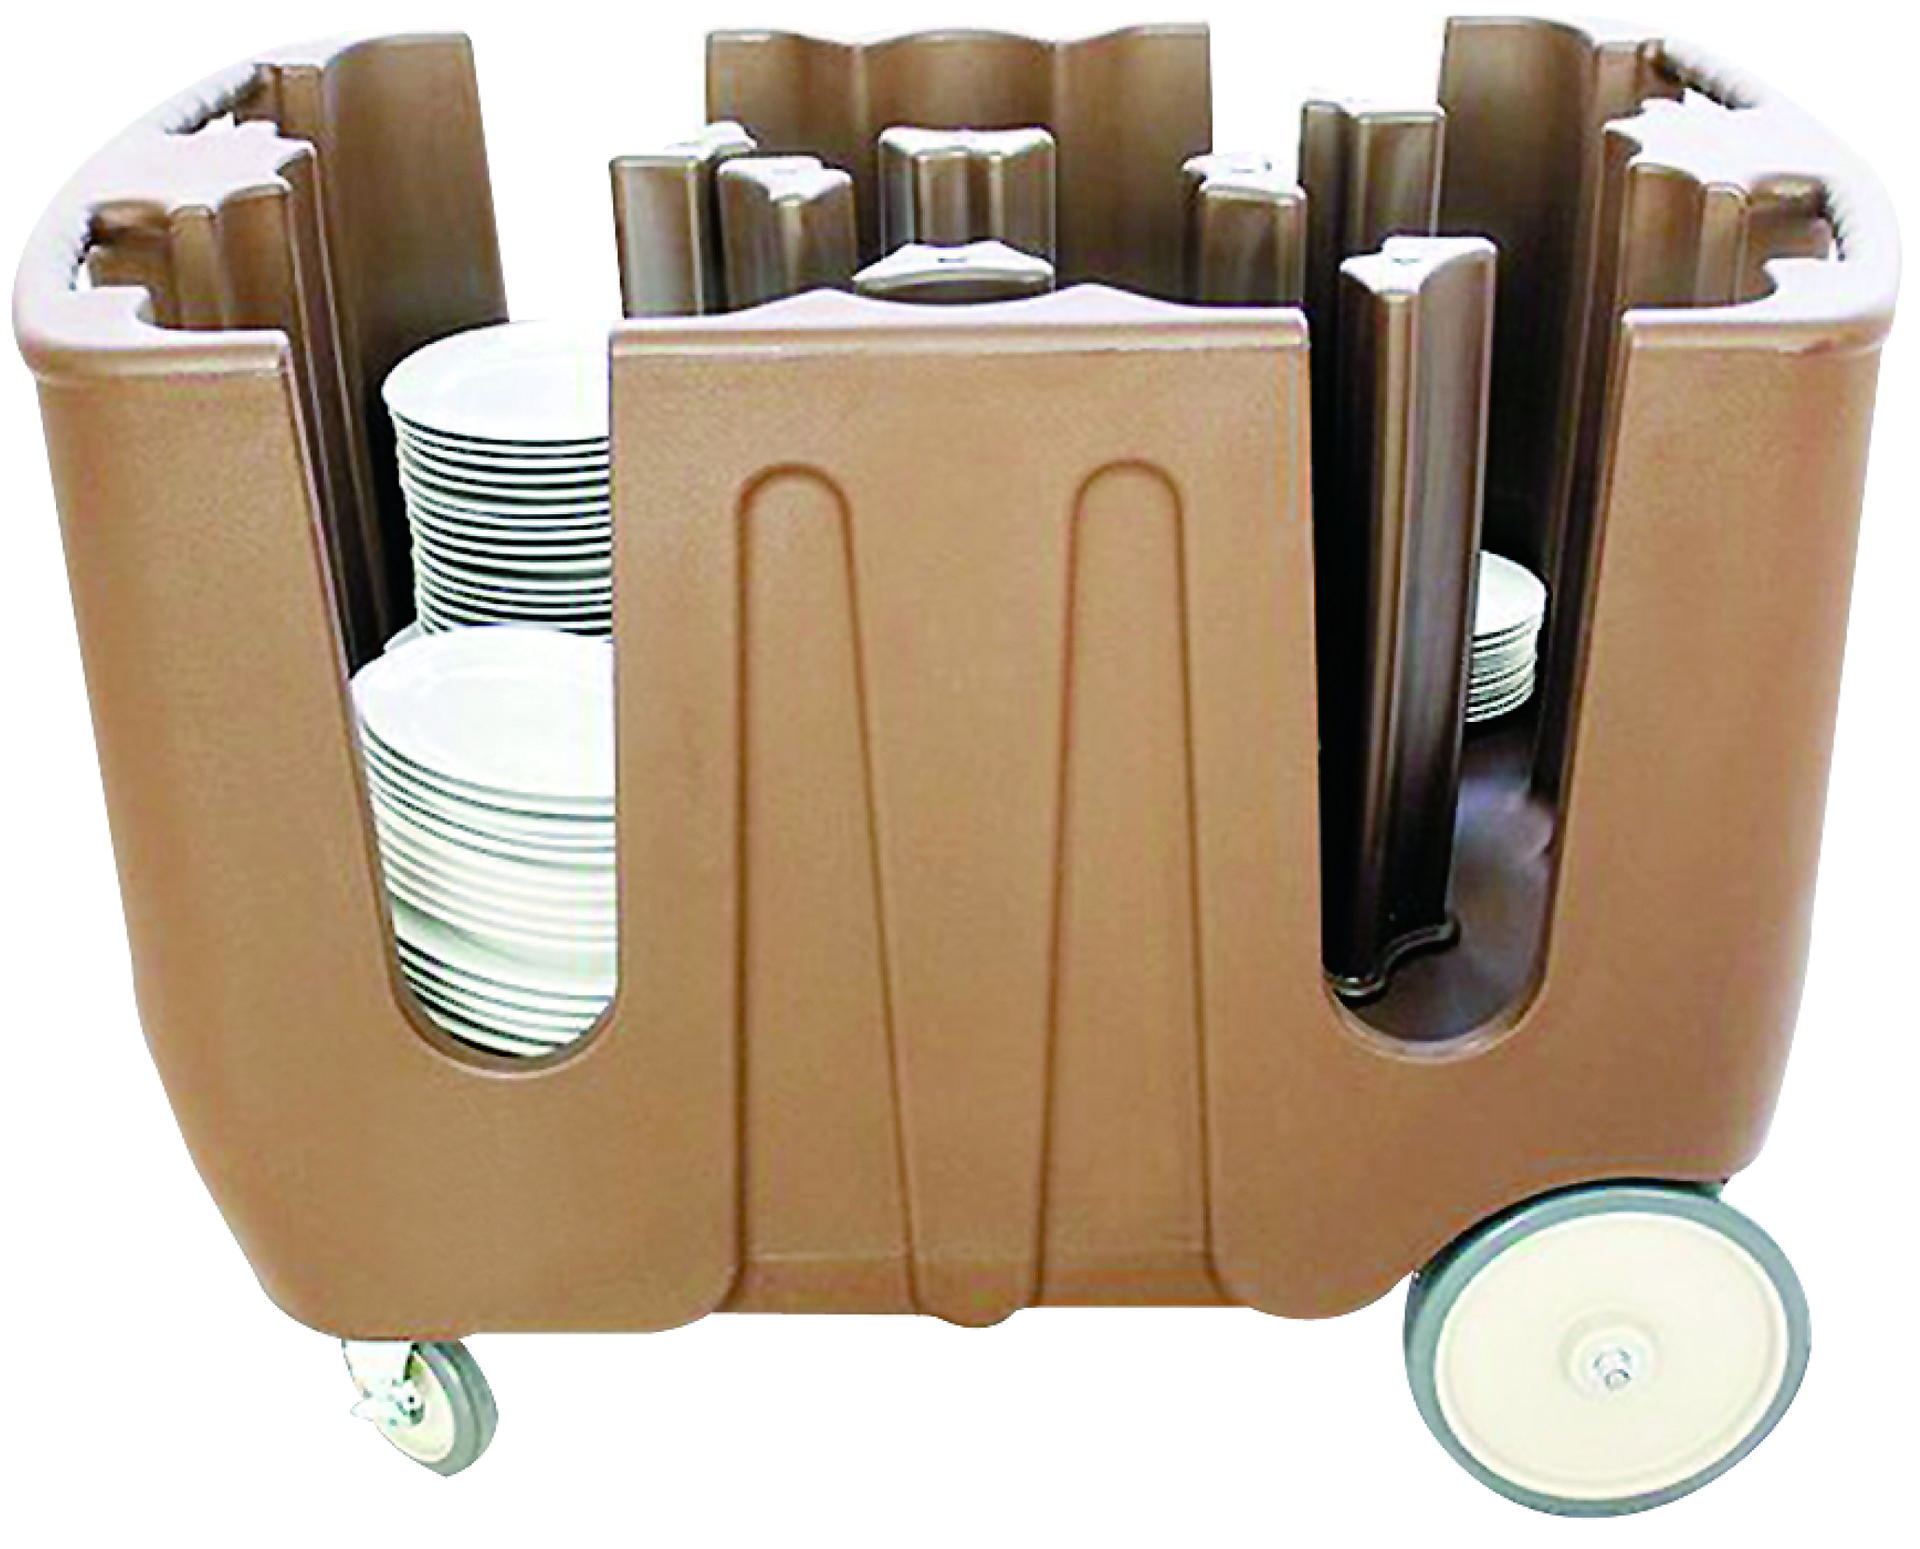 Food Service Industry 10 Inch PP Rim TPR Thermoplastic Rubber Dish Dollies Carts Trolleys Wheel